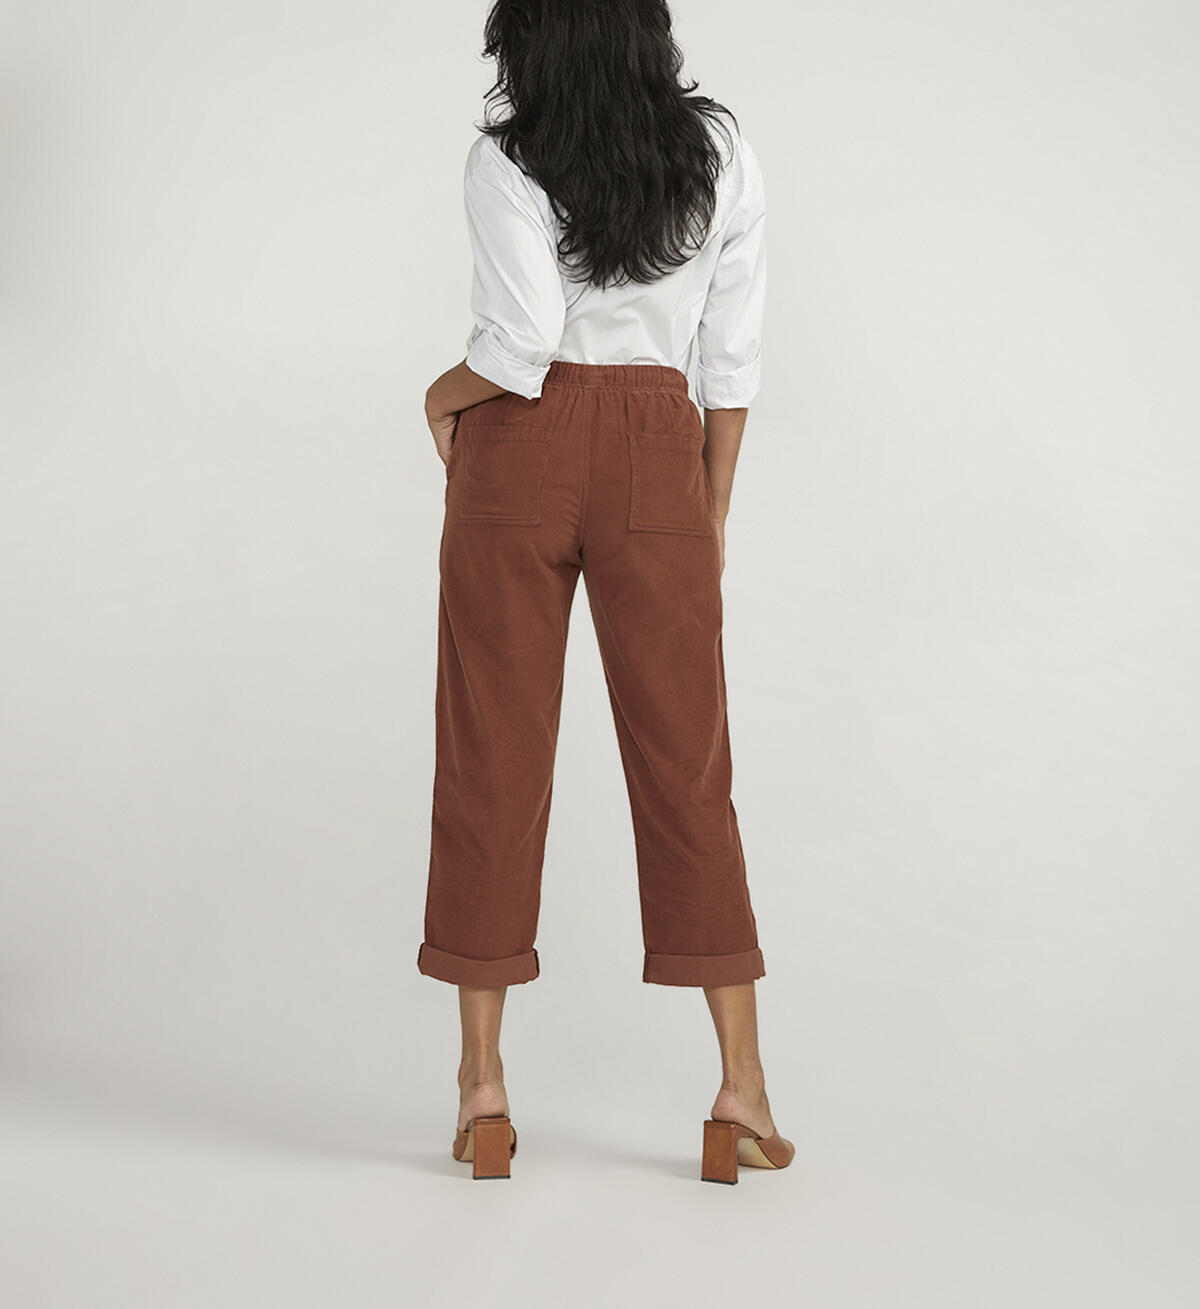 Relaxed Drawstring Pants, Cappucino, hi-res image number 1